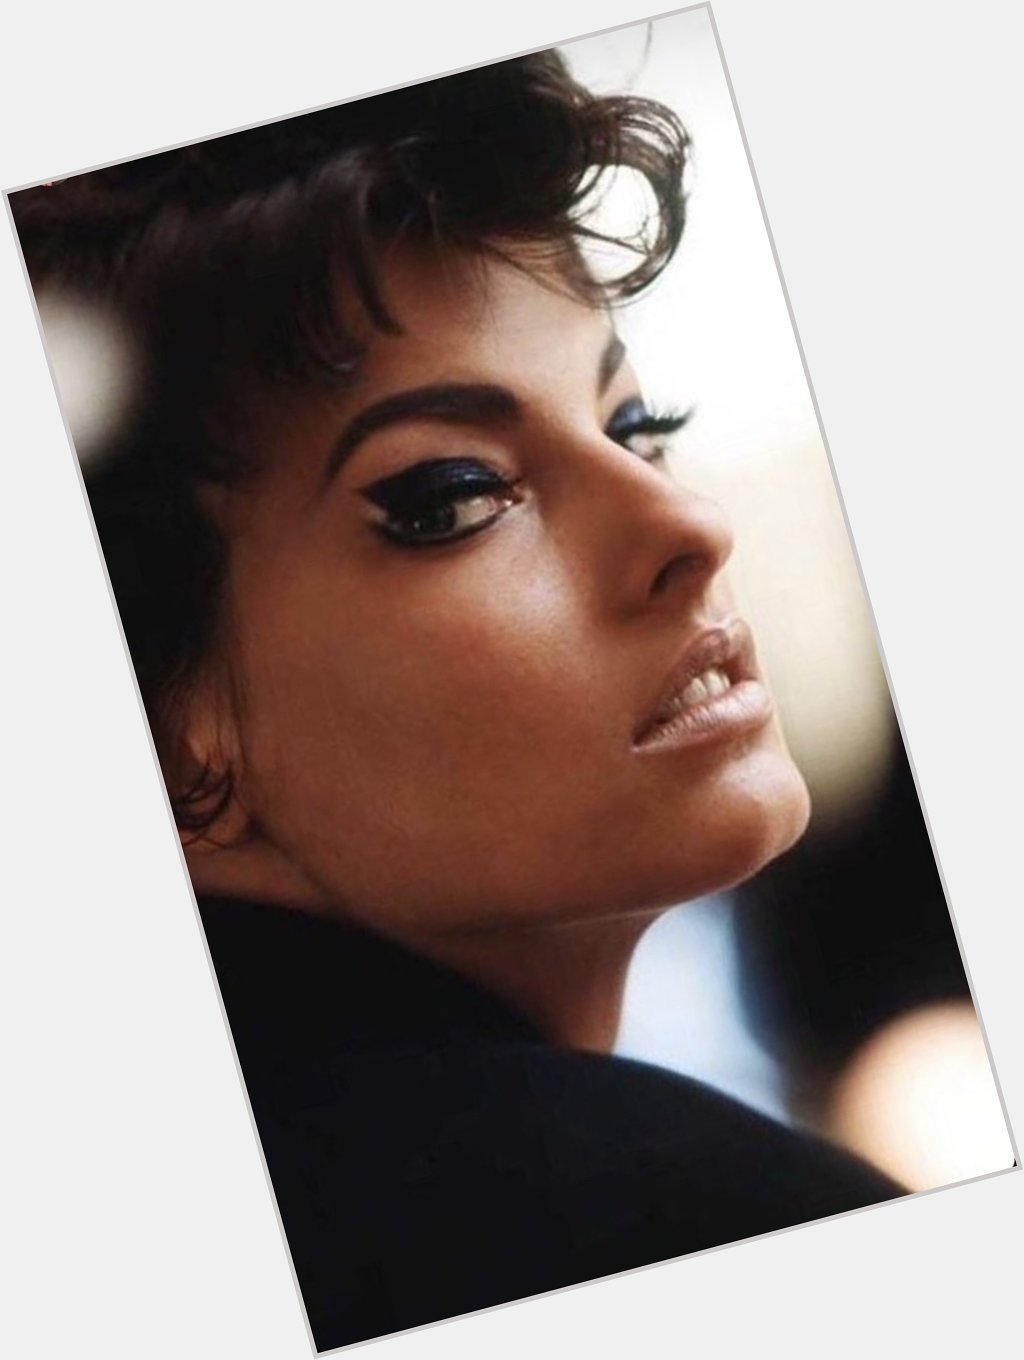 Happy bday to the one and only Linda Evangelista! 